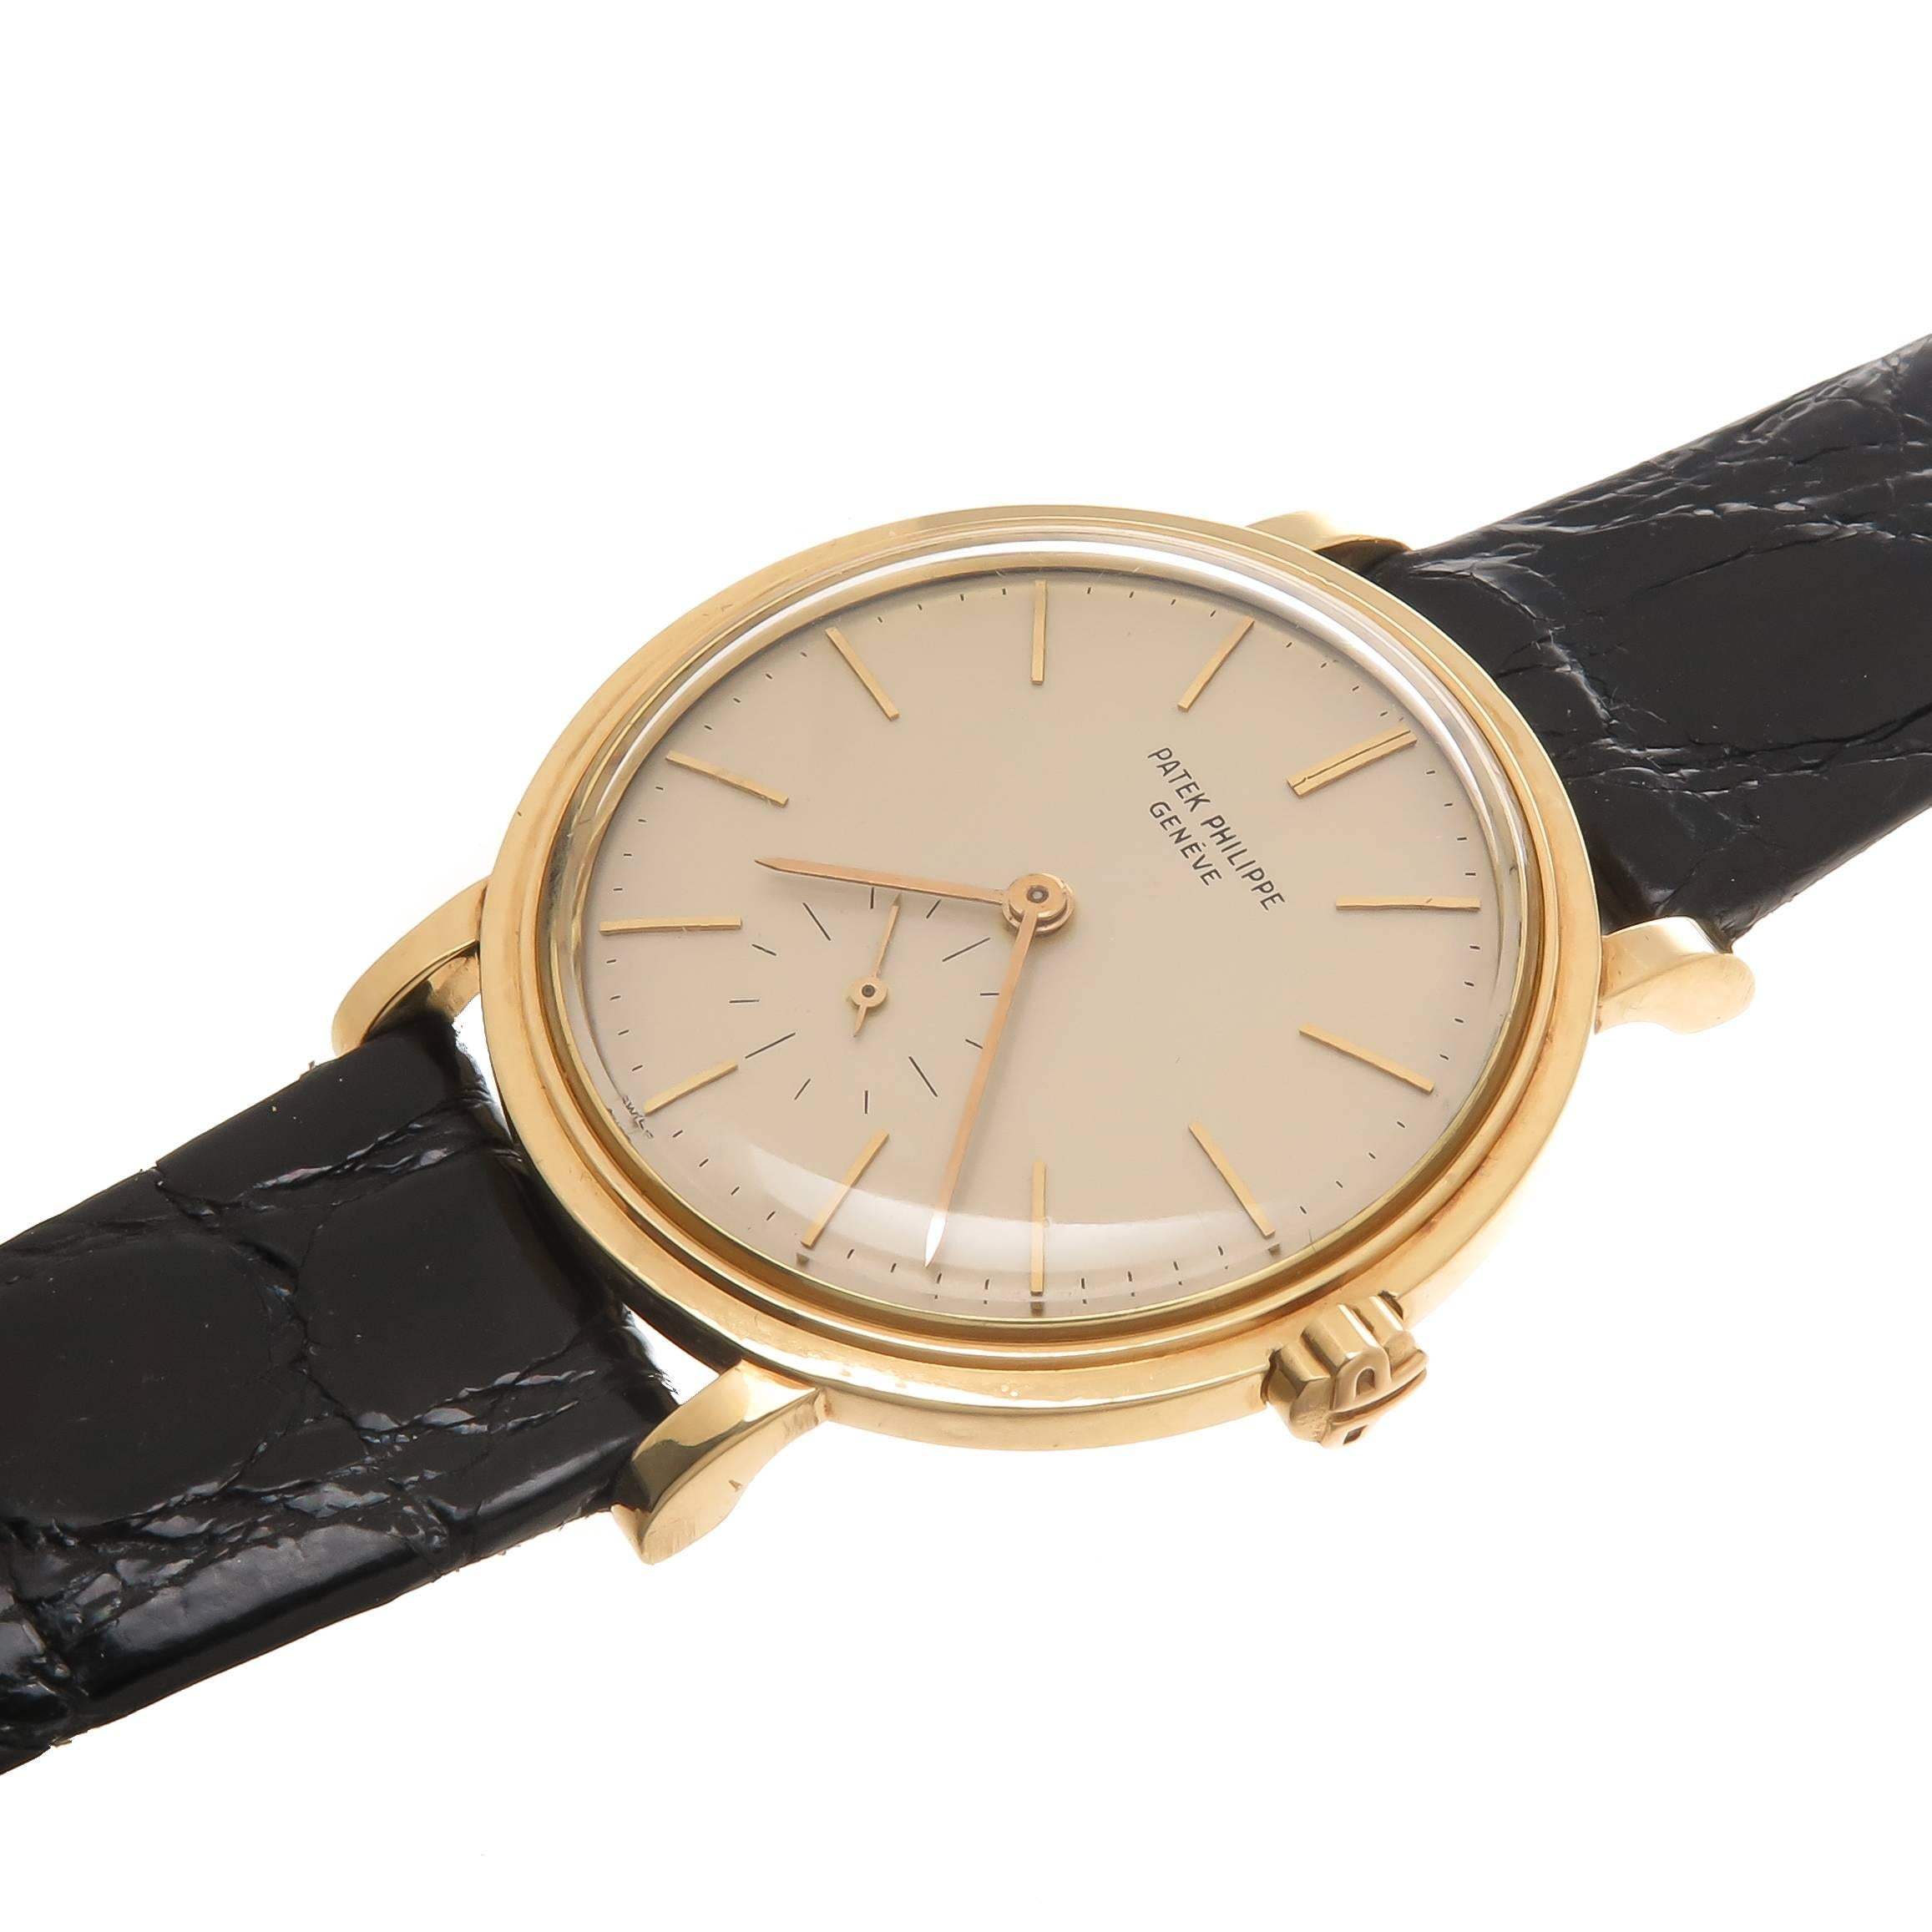 Circa 1960s Patek Philippe reference 3429 Calatrava gents wrist watch, 35 MM 2 piece, water proof case. Caliber 27-460 37 jewel Automatic, self winding movement with Gold Rotor. Matt Silver dial with raised Gold Markers that is original and in